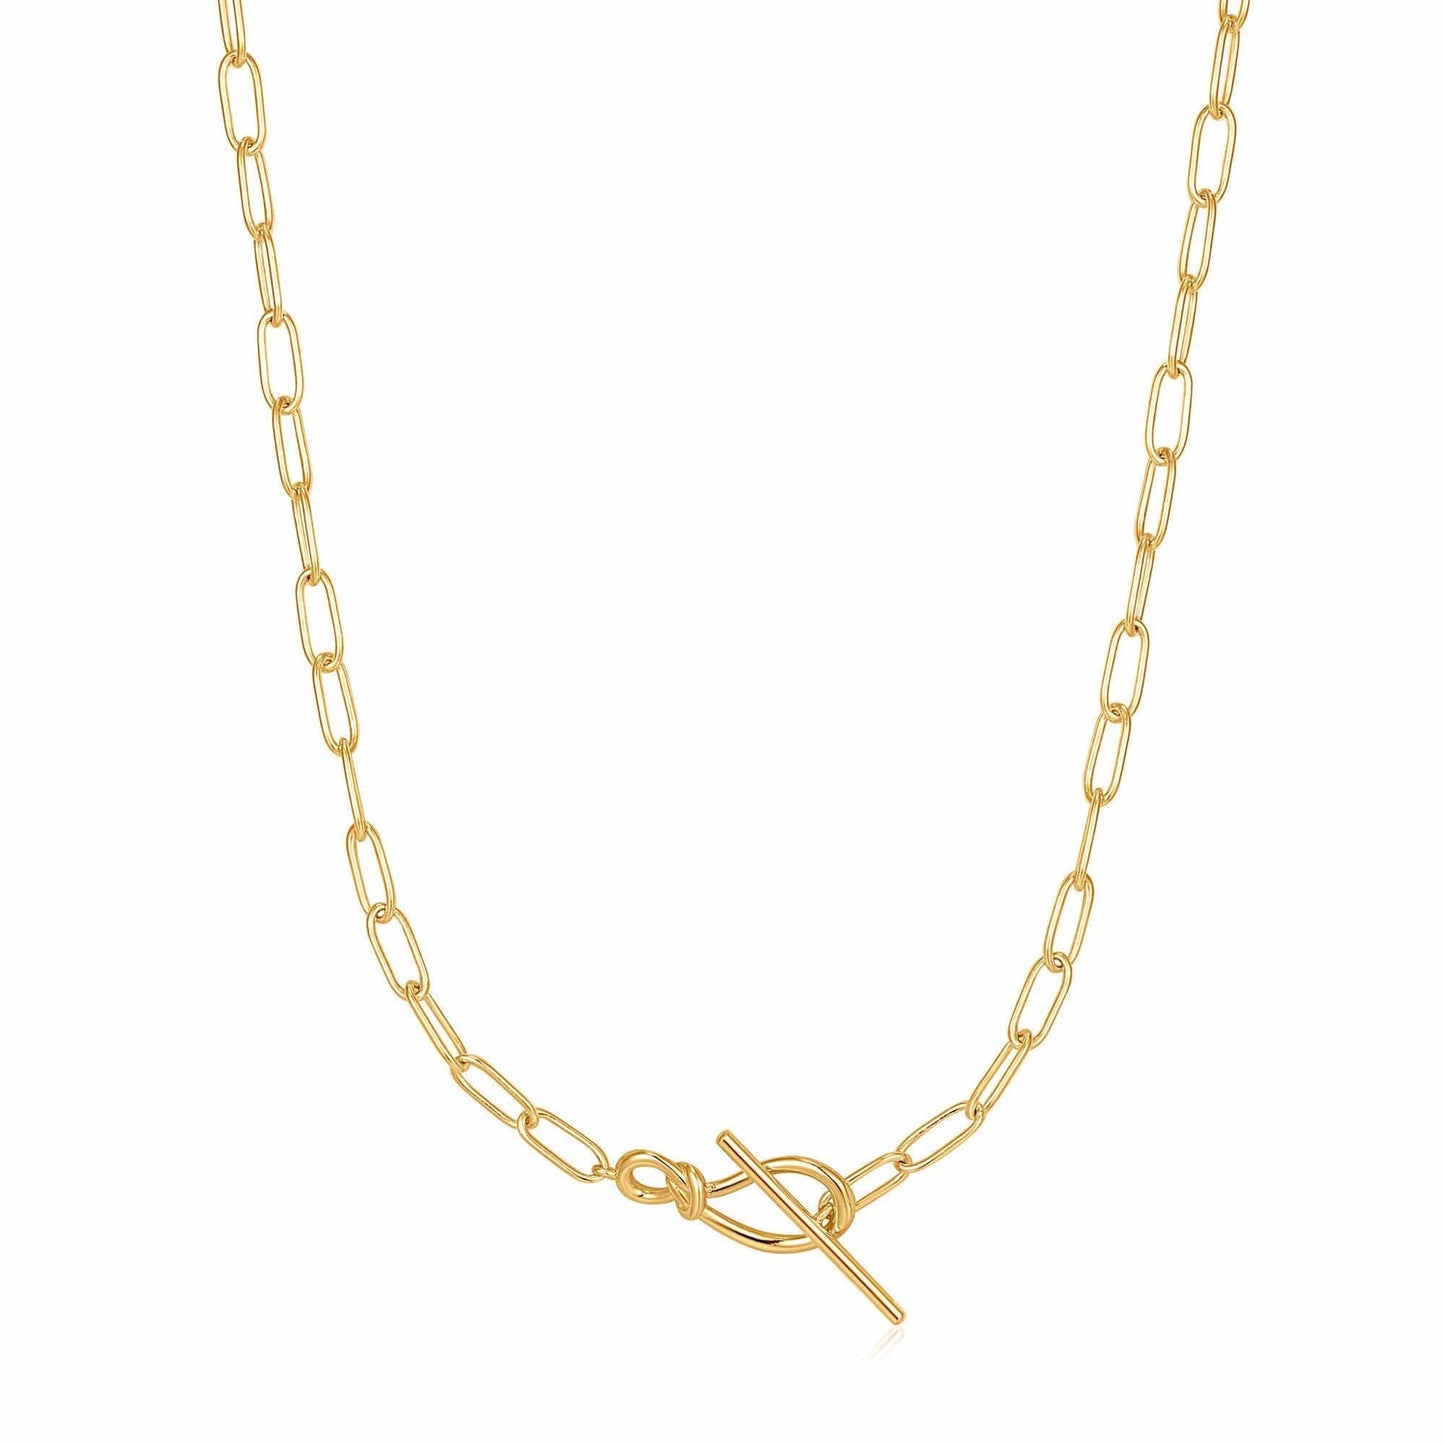 NKL-GPL Gold Knot T Bar Chain Necklace